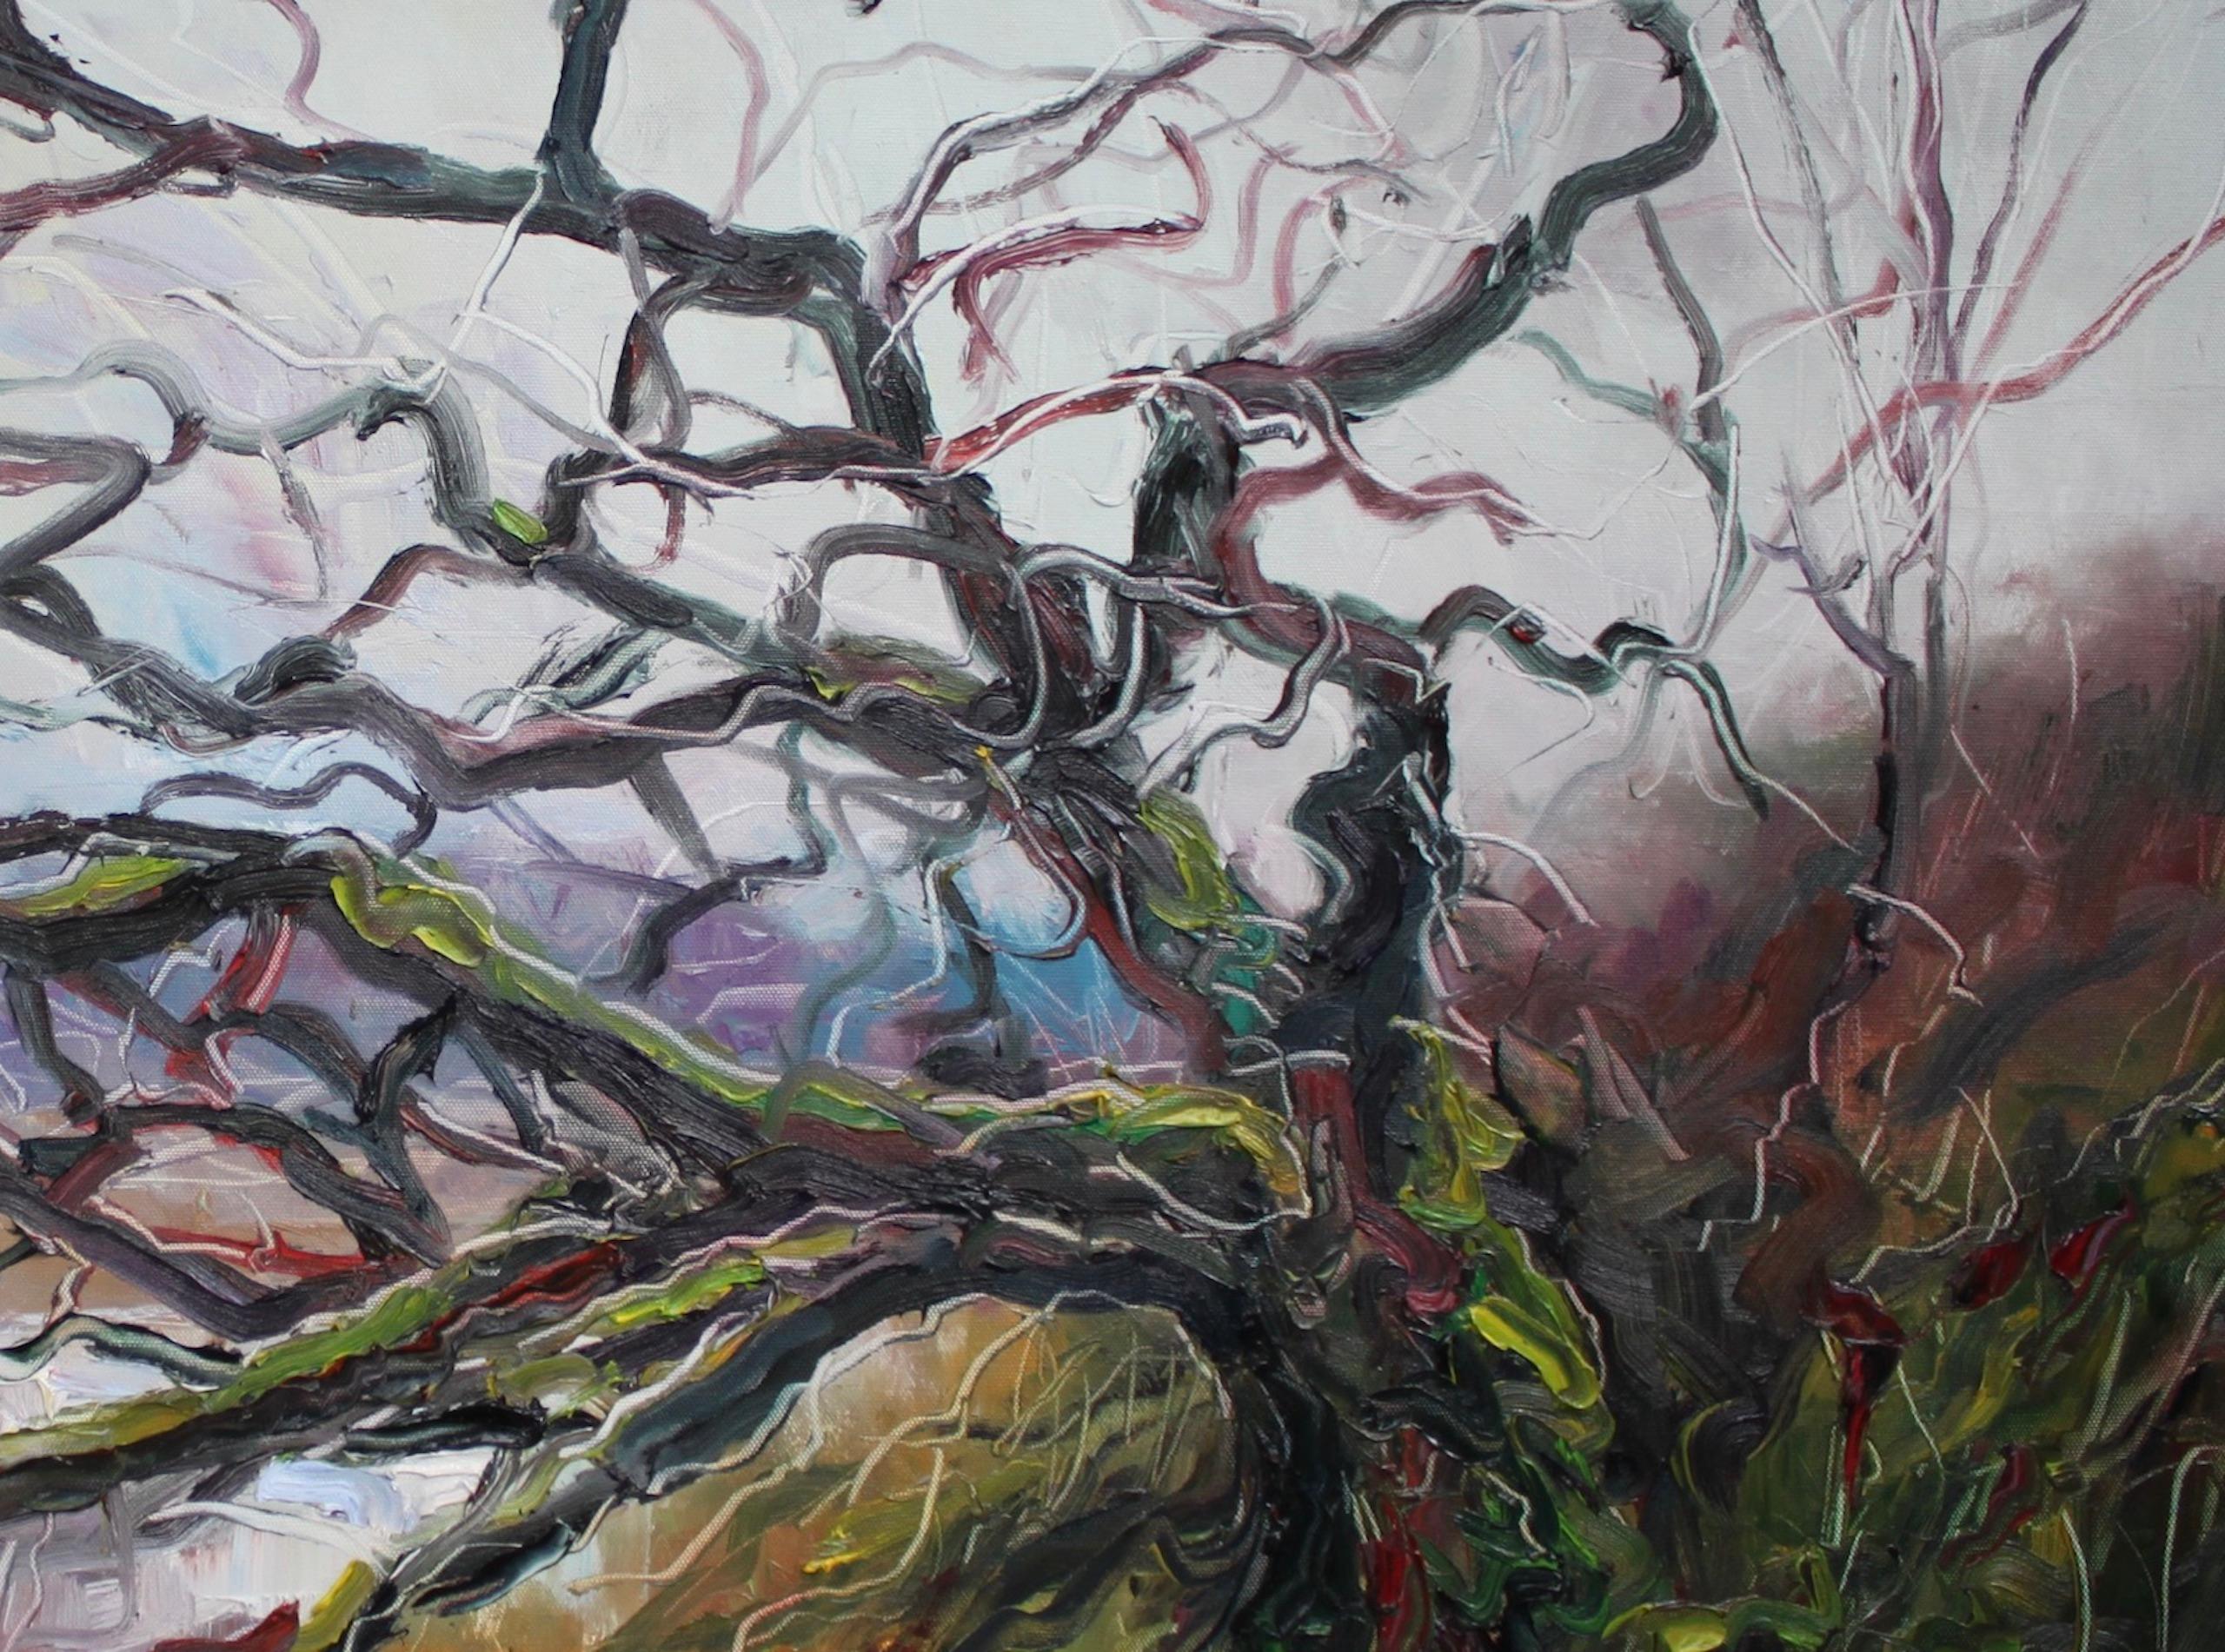 Atlantic Oak Loch Arienas is a unique oil on canvas painting by contemporary artist Jonathan Shearer, dimensions are 70 × 100 × 3.5 cm (27.6 × 39.4 × 1.4 in).
The artwork is signed, sold unframed and comes with a certificate of